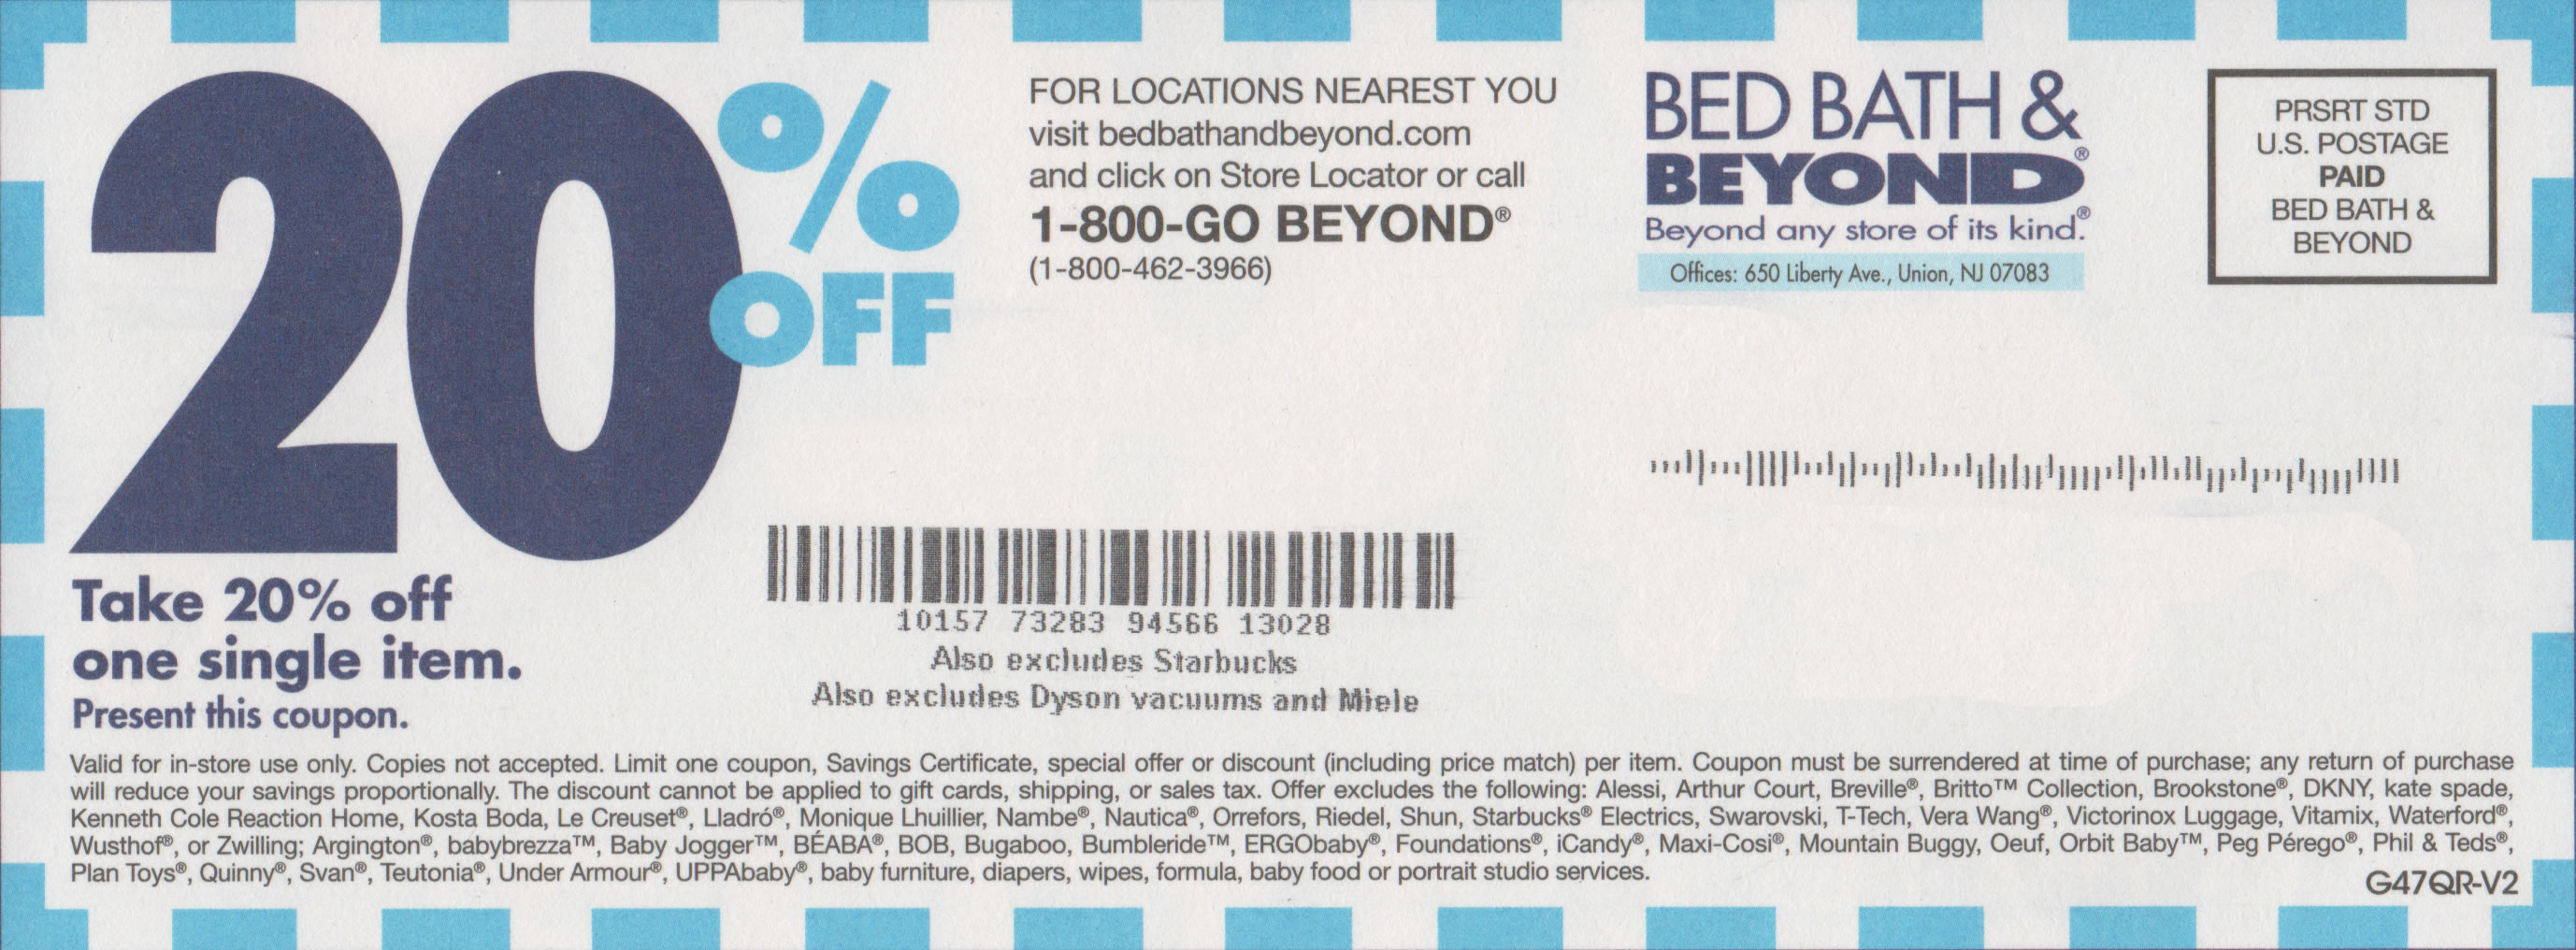 which-bed-bath-and-beyond-coupon-bed-bath-and-beyond-insider